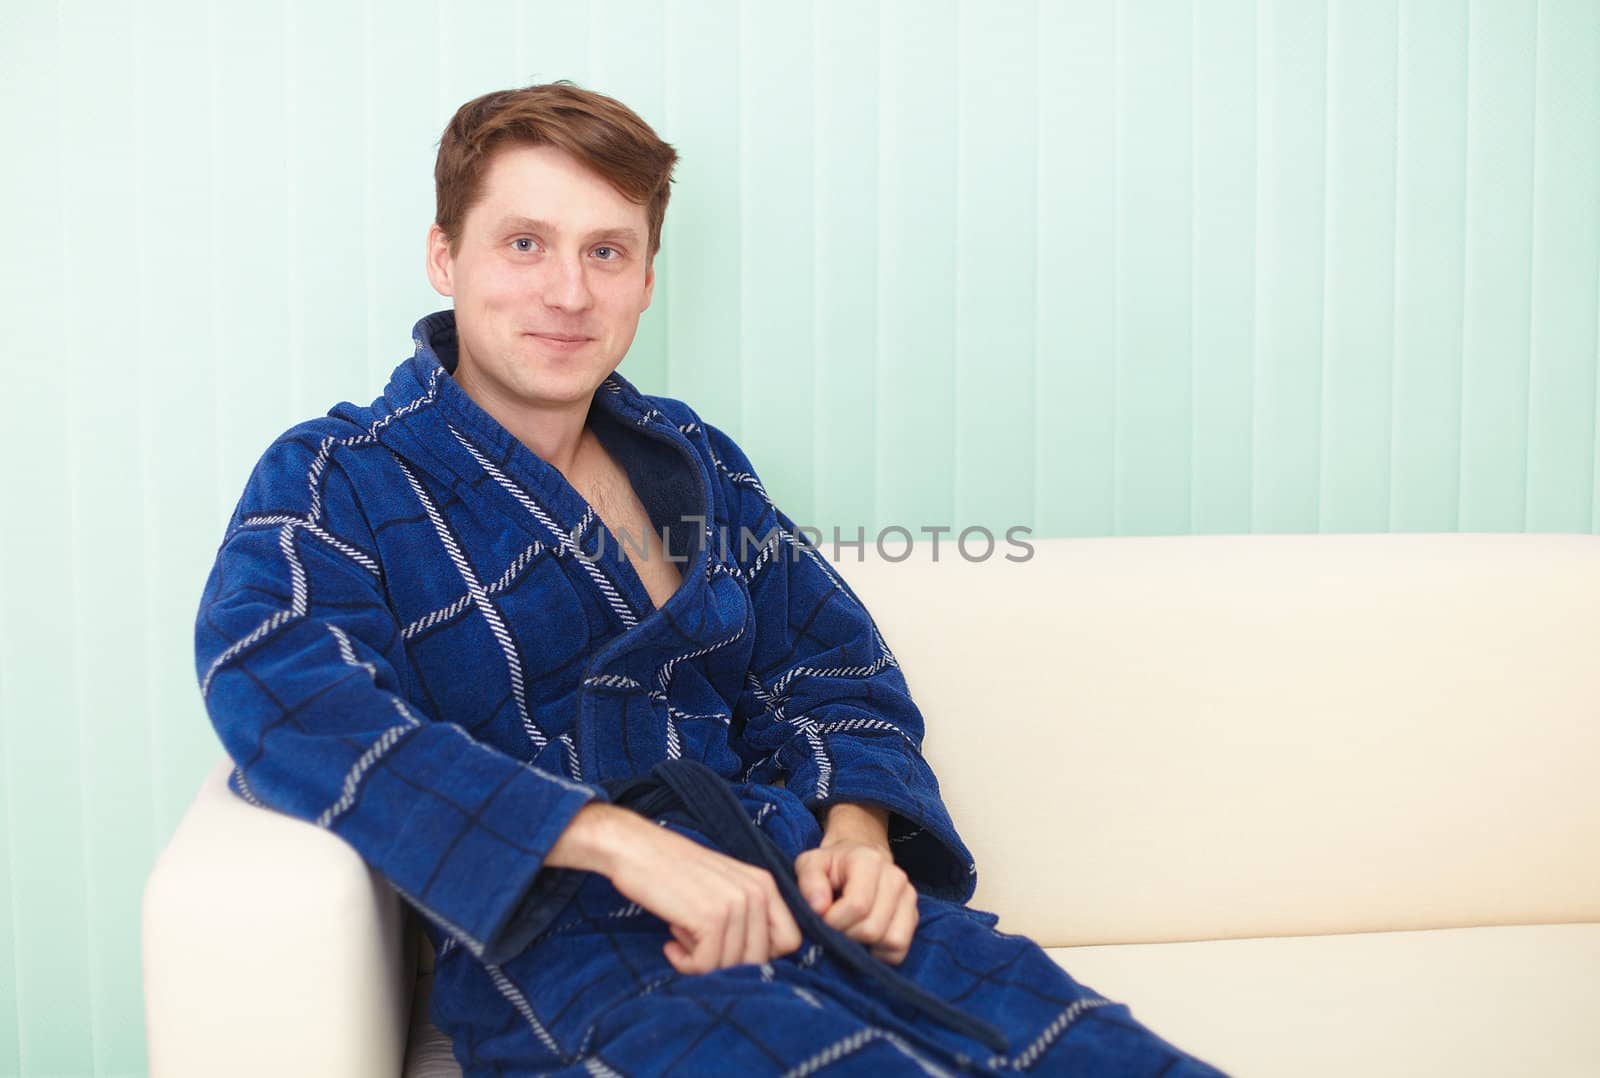 The guy sitting on a couch in a blue gown